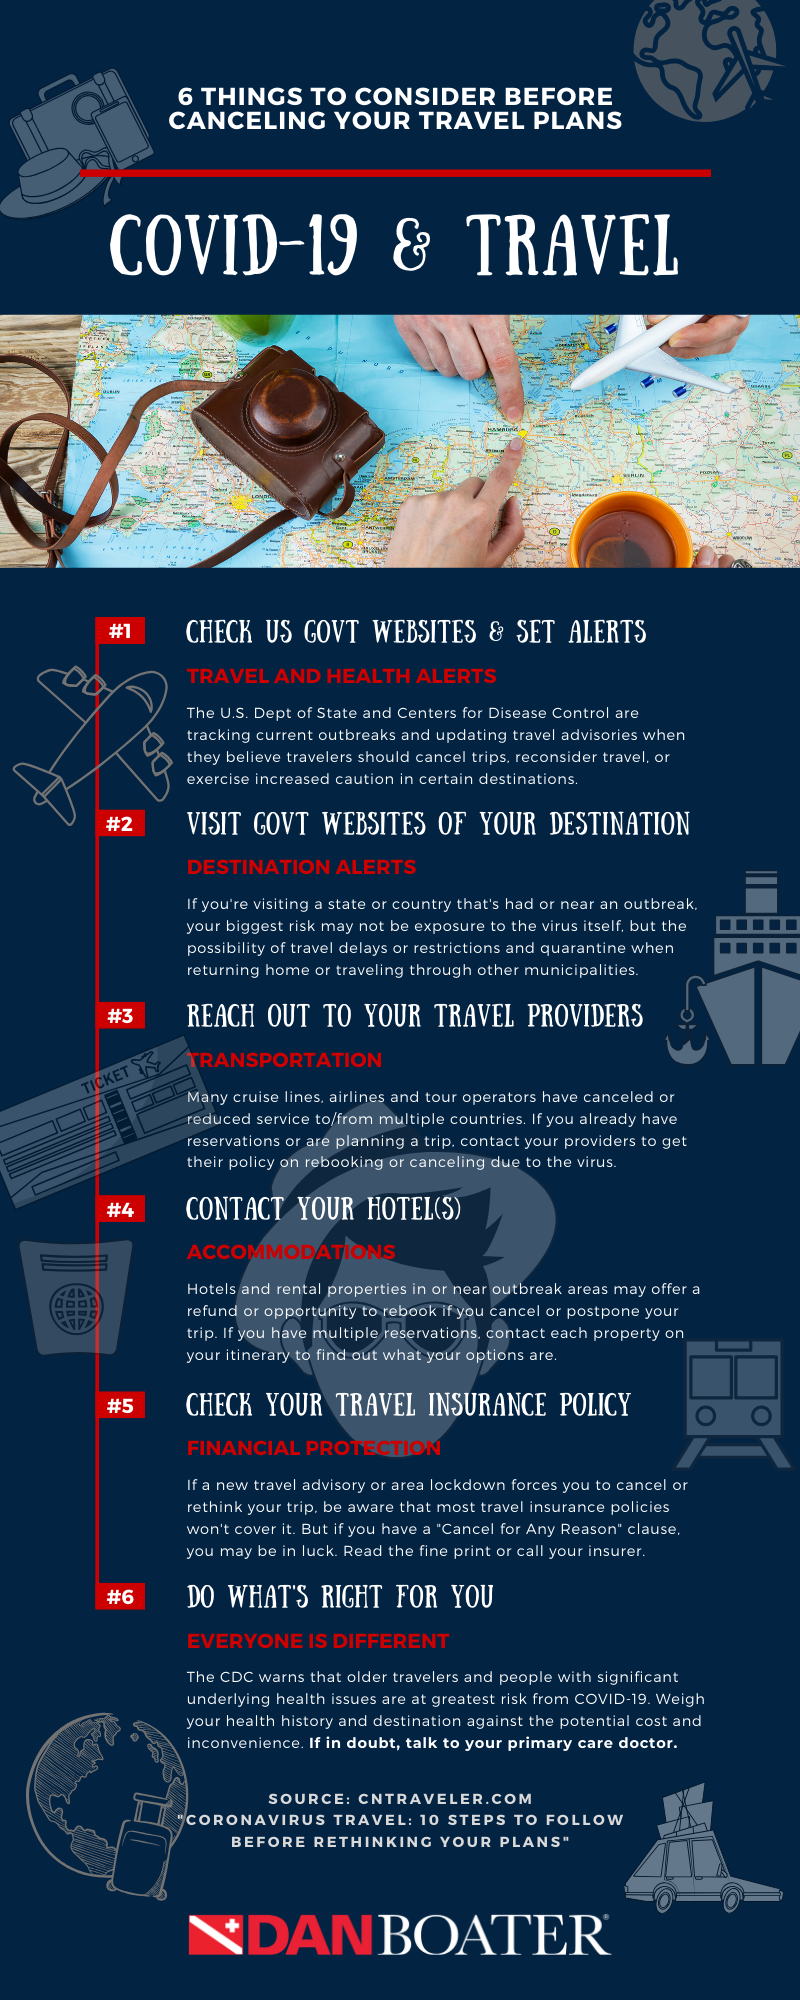 COVID-19 and Travel: 6 Things to Consider Before Canceling Your Travel Plans (infographic by DANBoater.org)